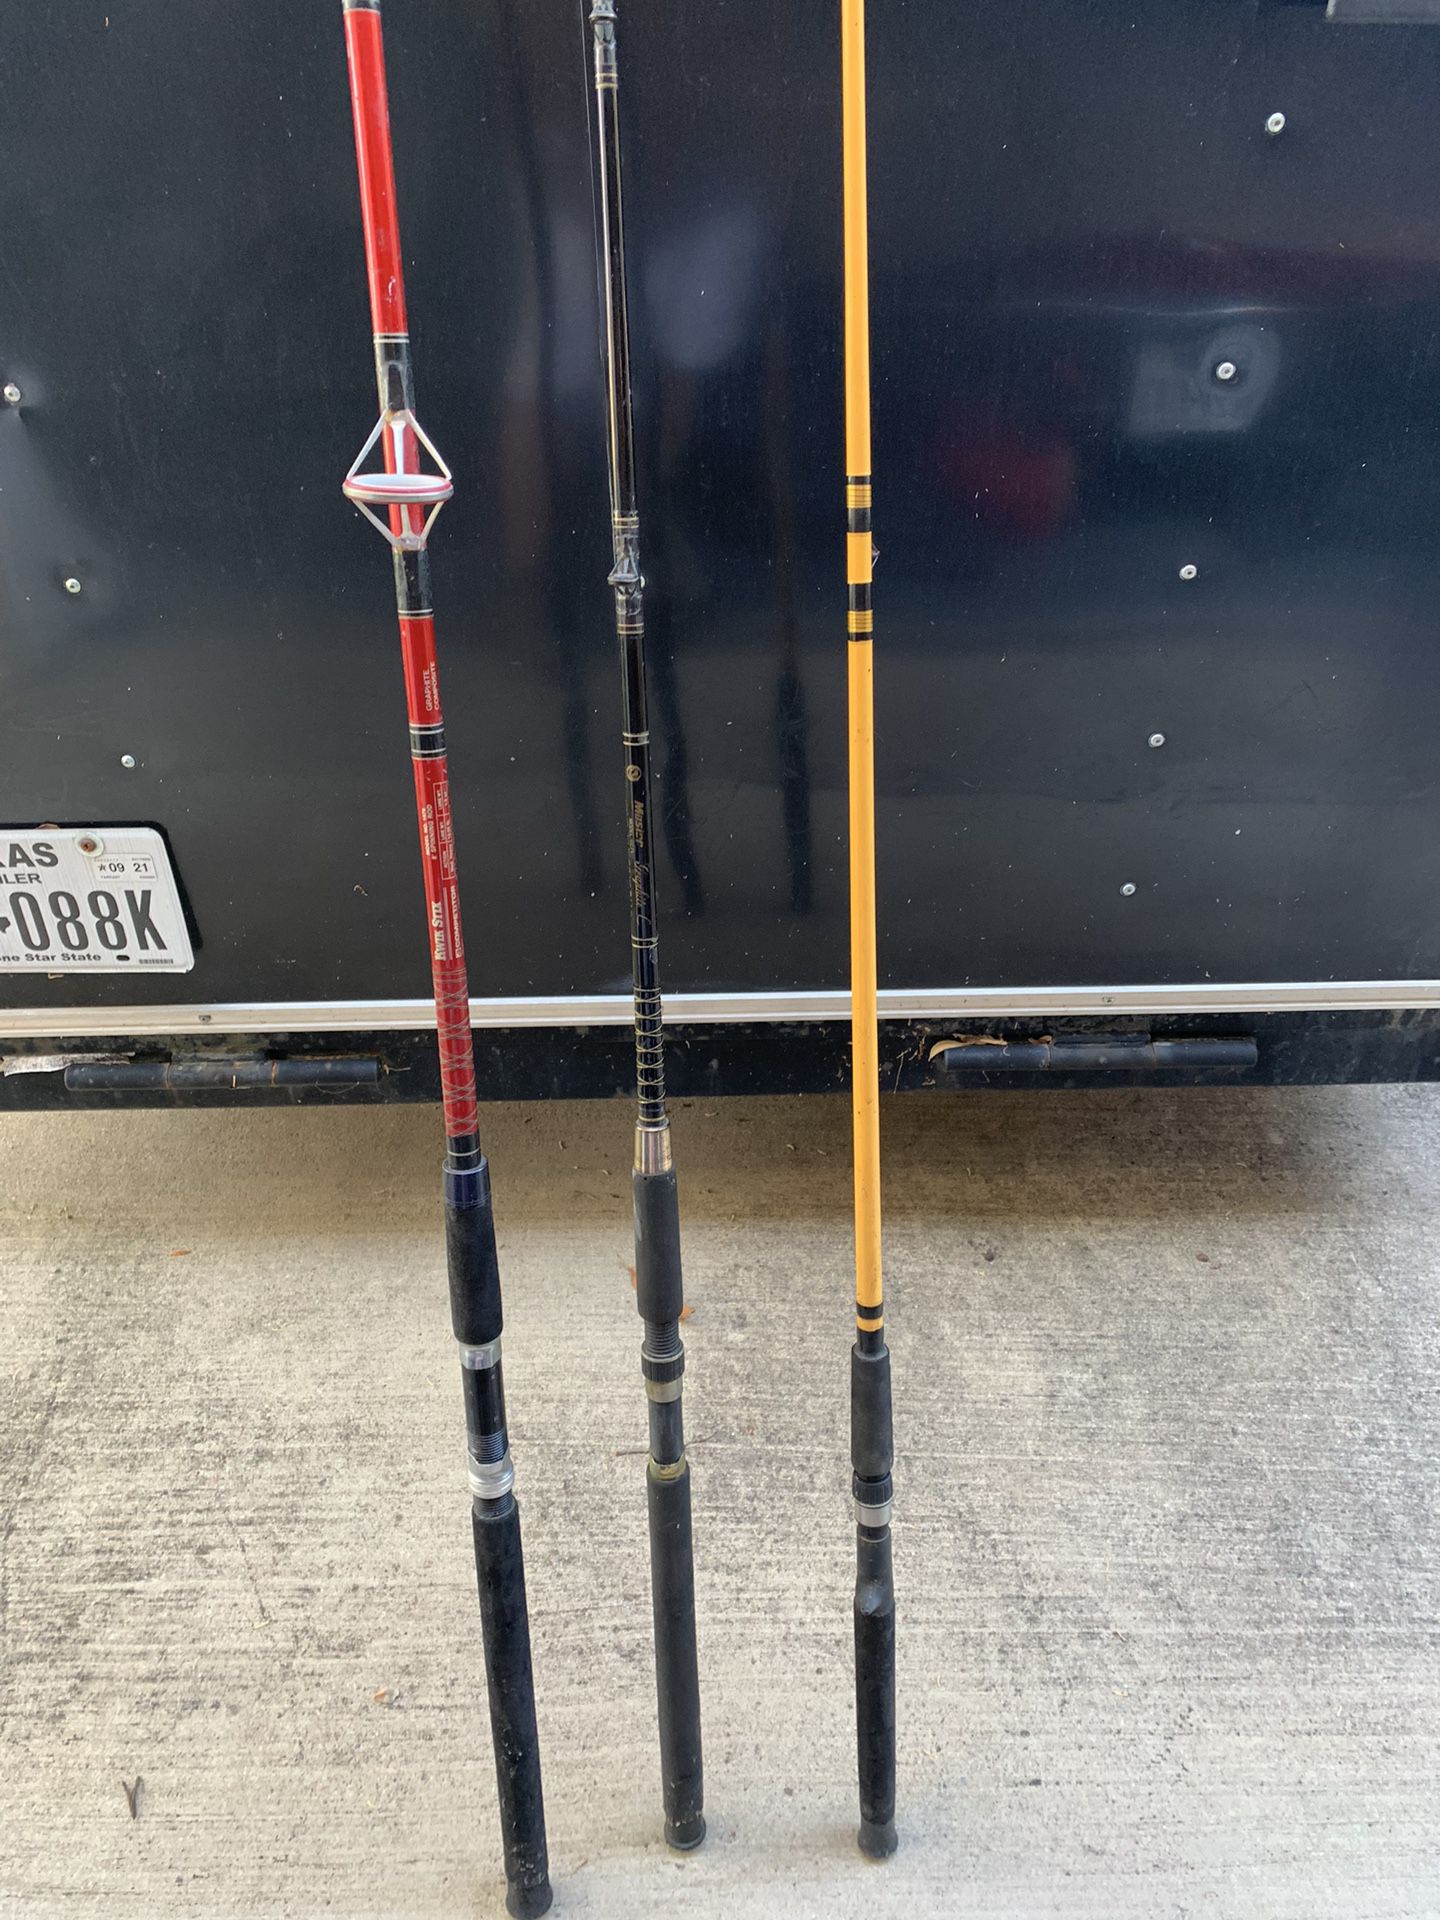 3LARGE CATFISH POLES - GREAT CONDITION $50 for Sale in Benbrook